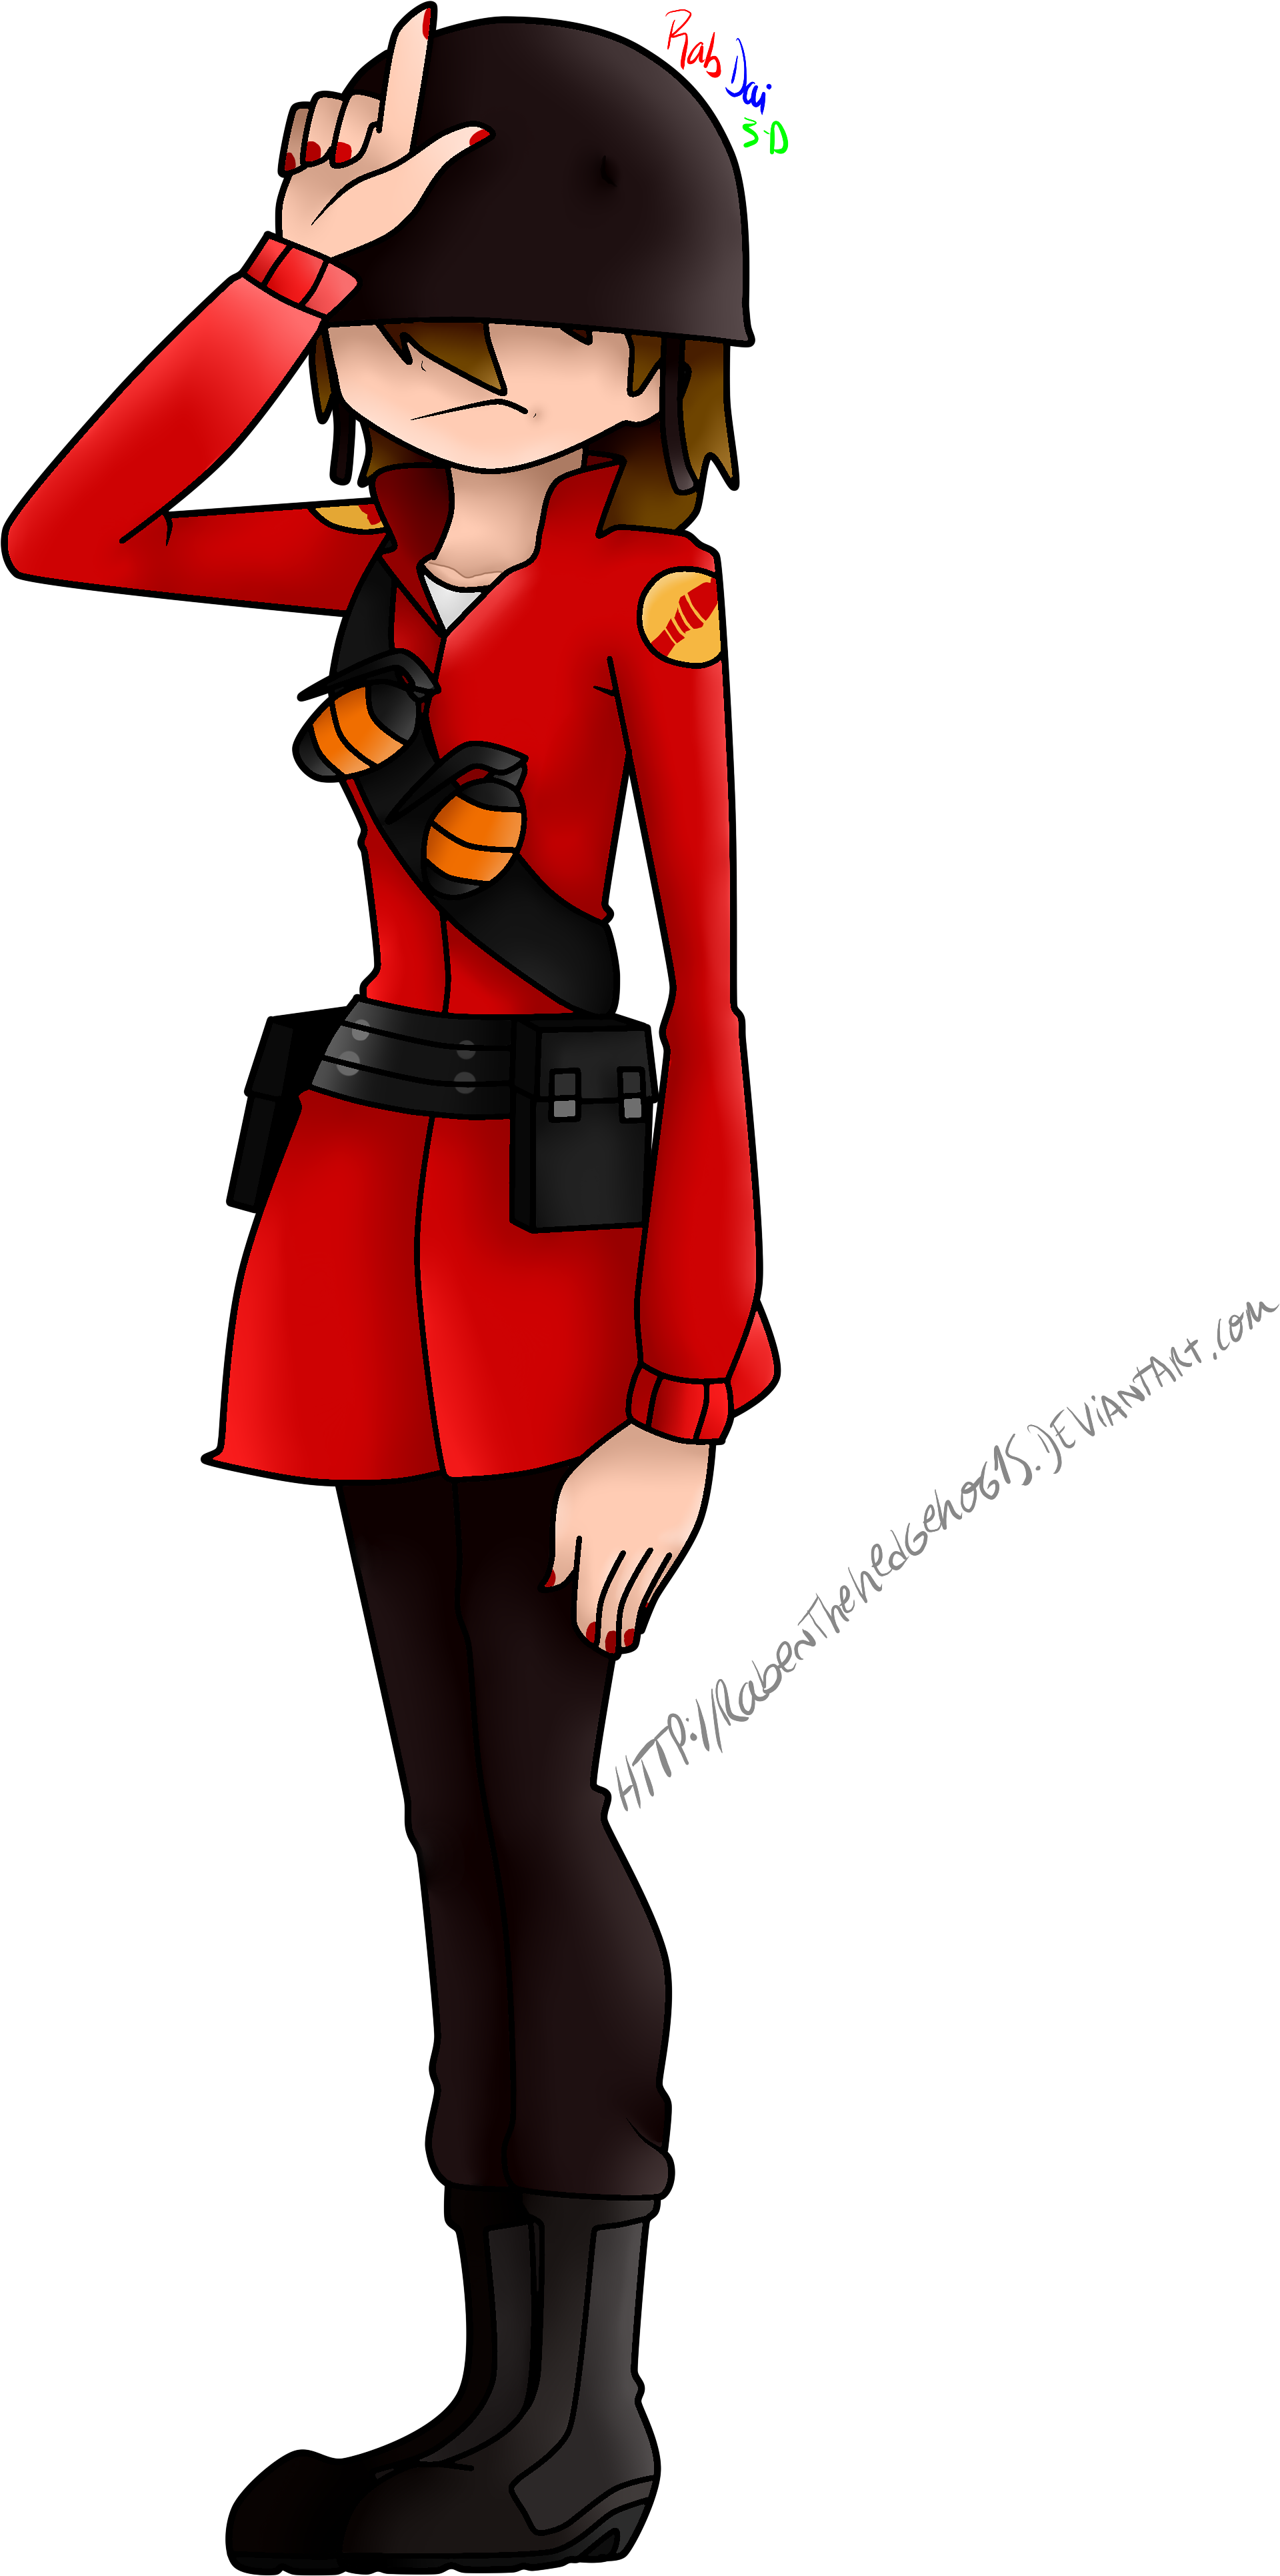 A Cartoon Of A Woman In A Red And Black Outfit